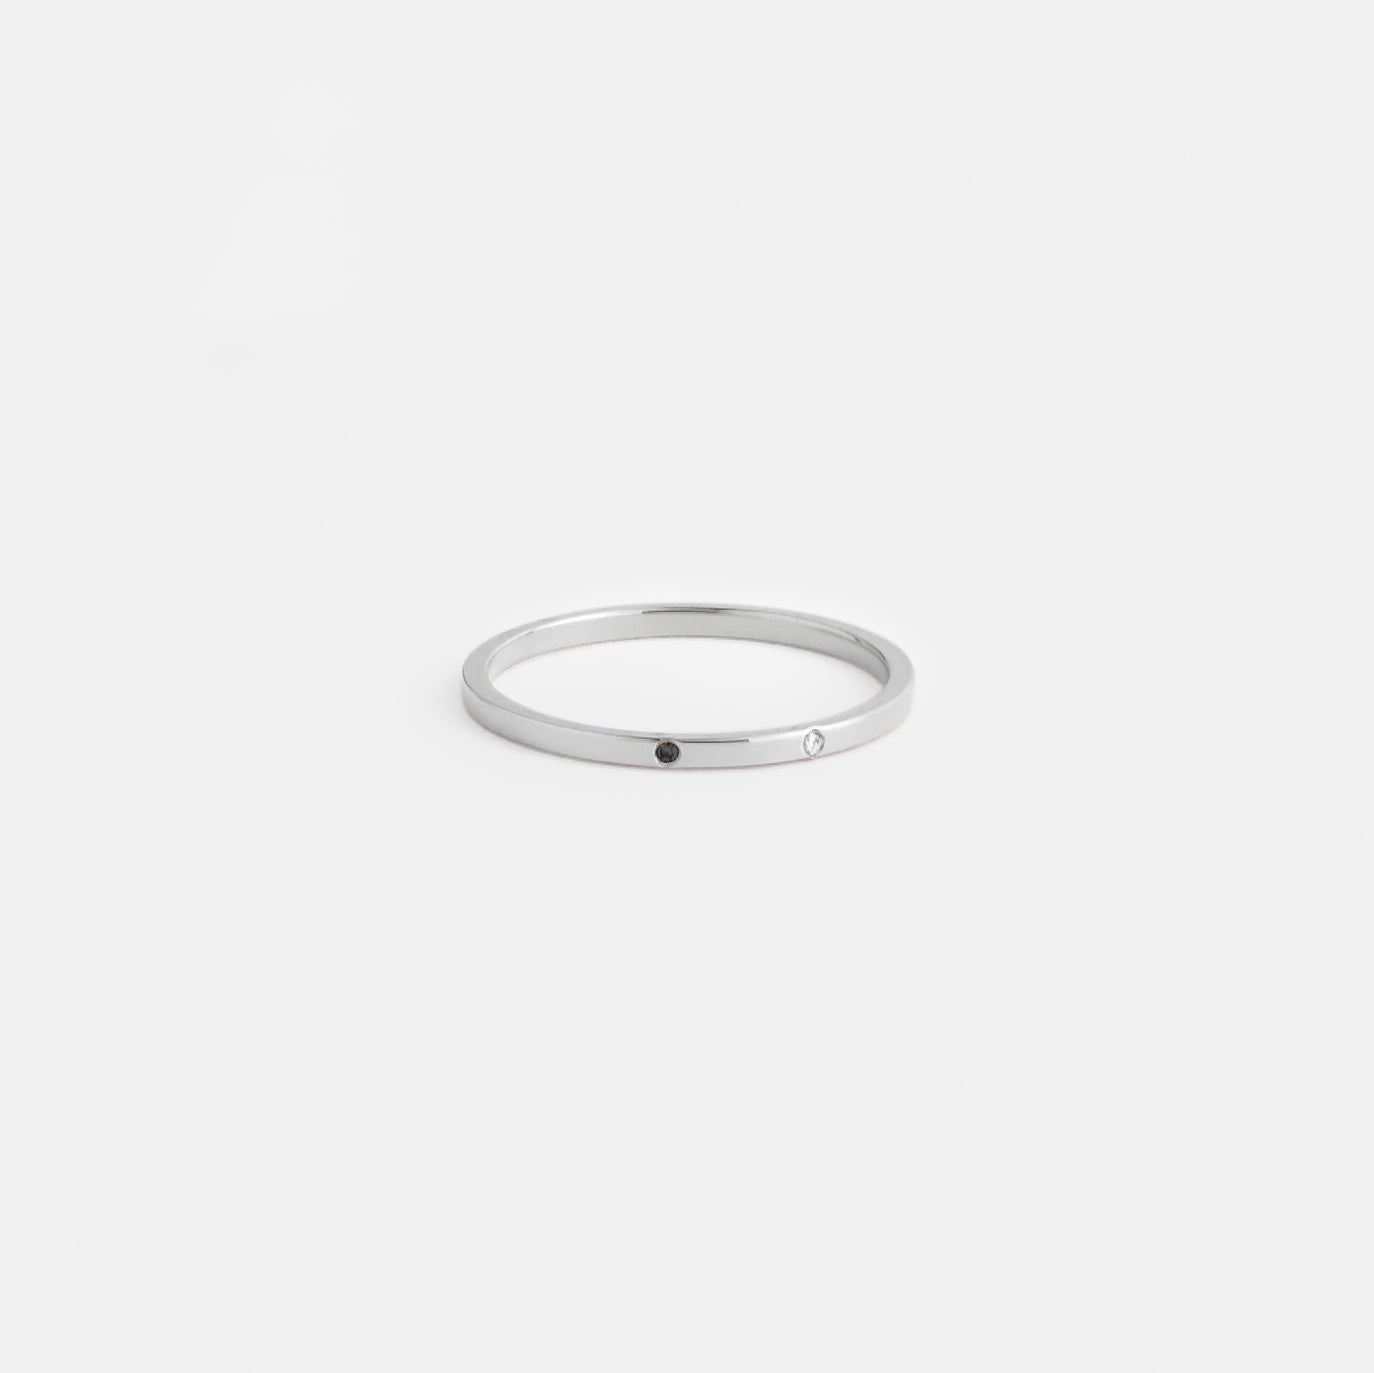 Sarala MInimalist Ring in Sterling Silver set with White and Black Diamonds By SHW Fine Jewelry NYC